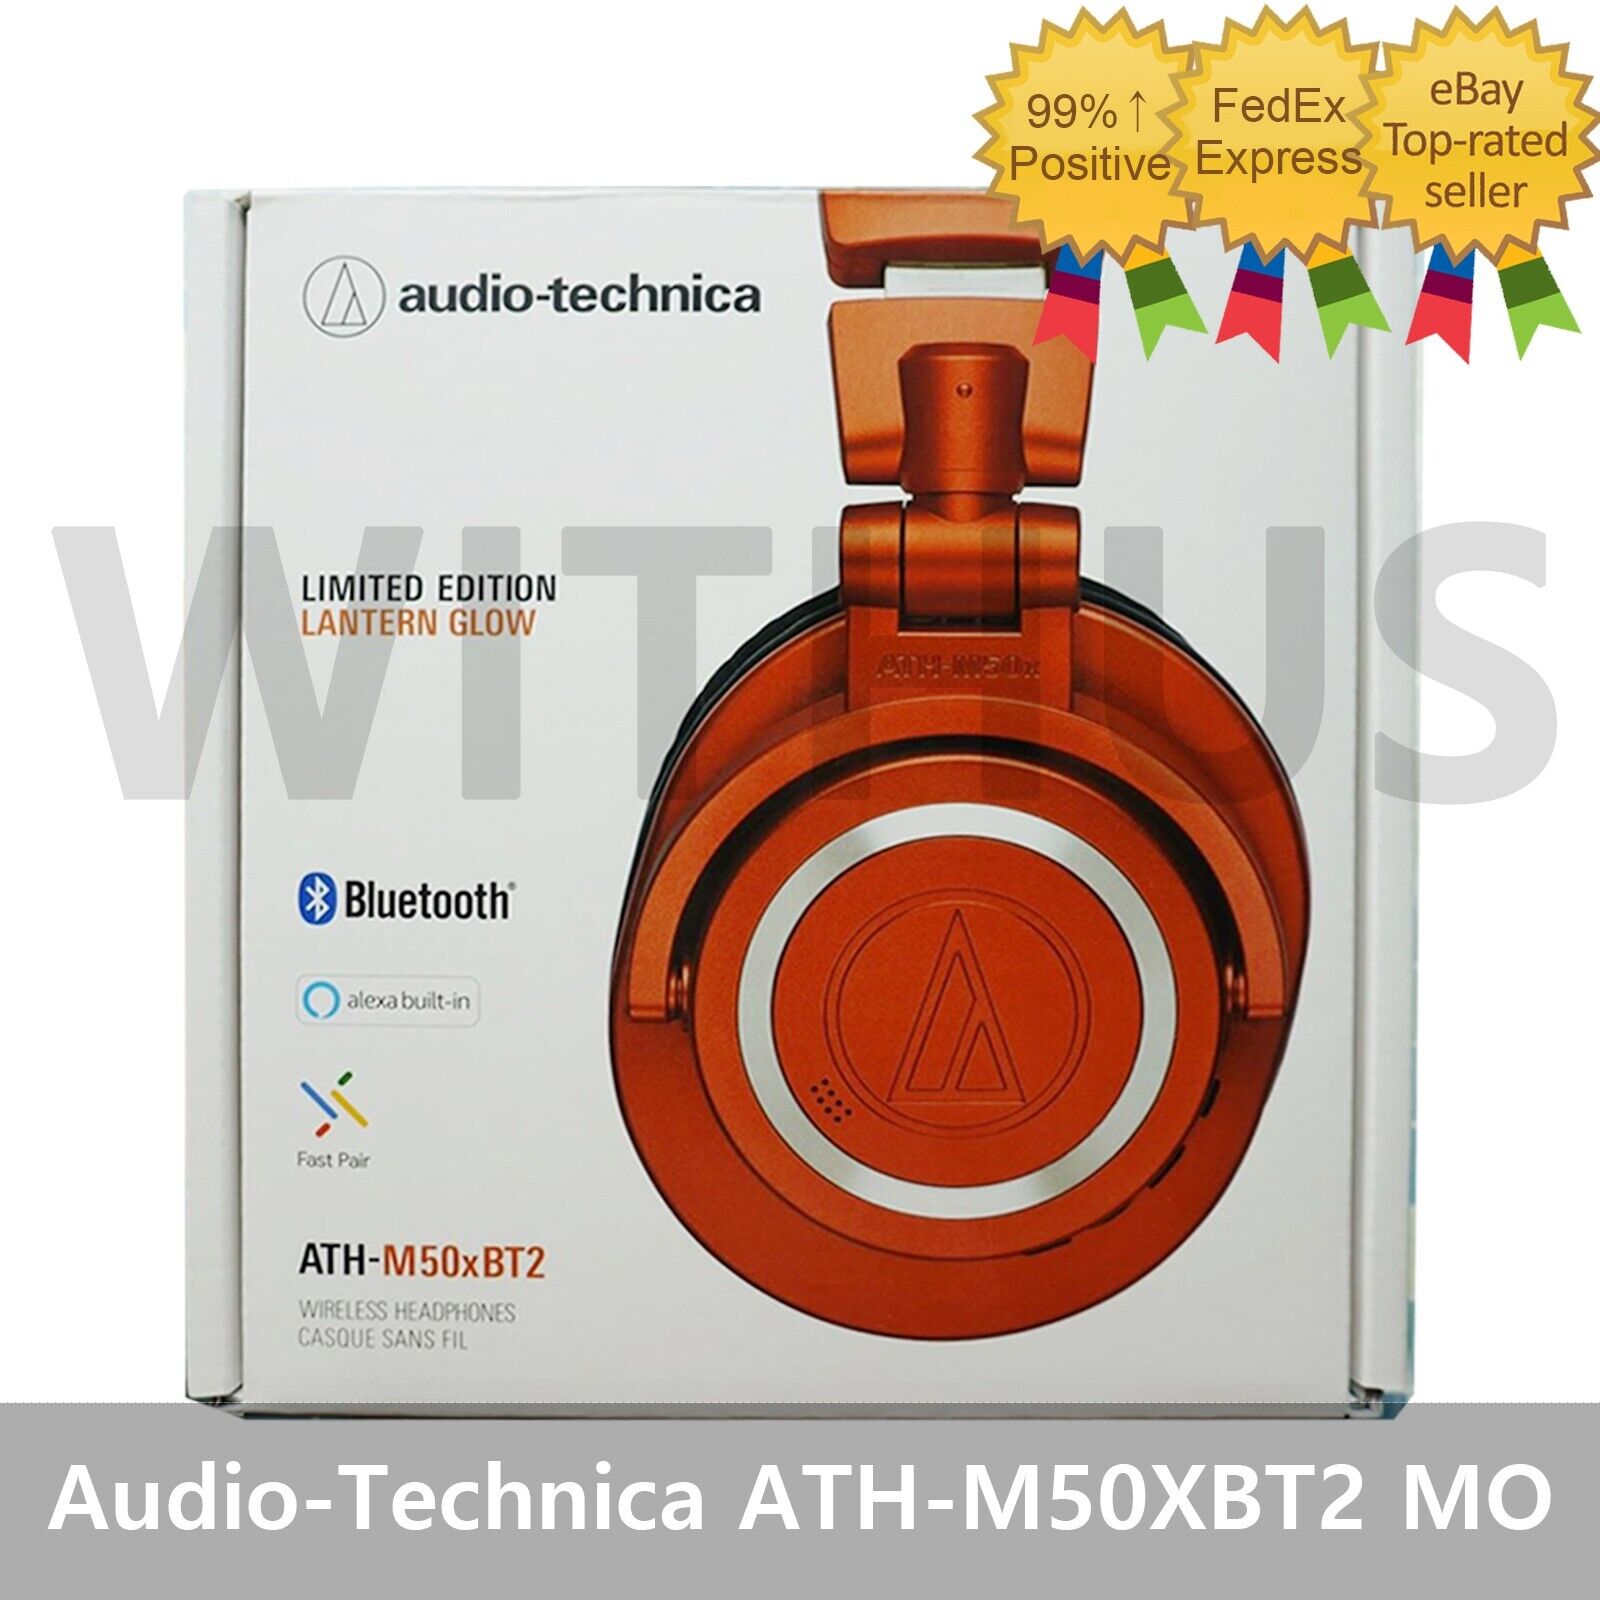 Audio-Technica ATH-M50XBT2 MO Wireless Over-Ear Headphone Limited Edition